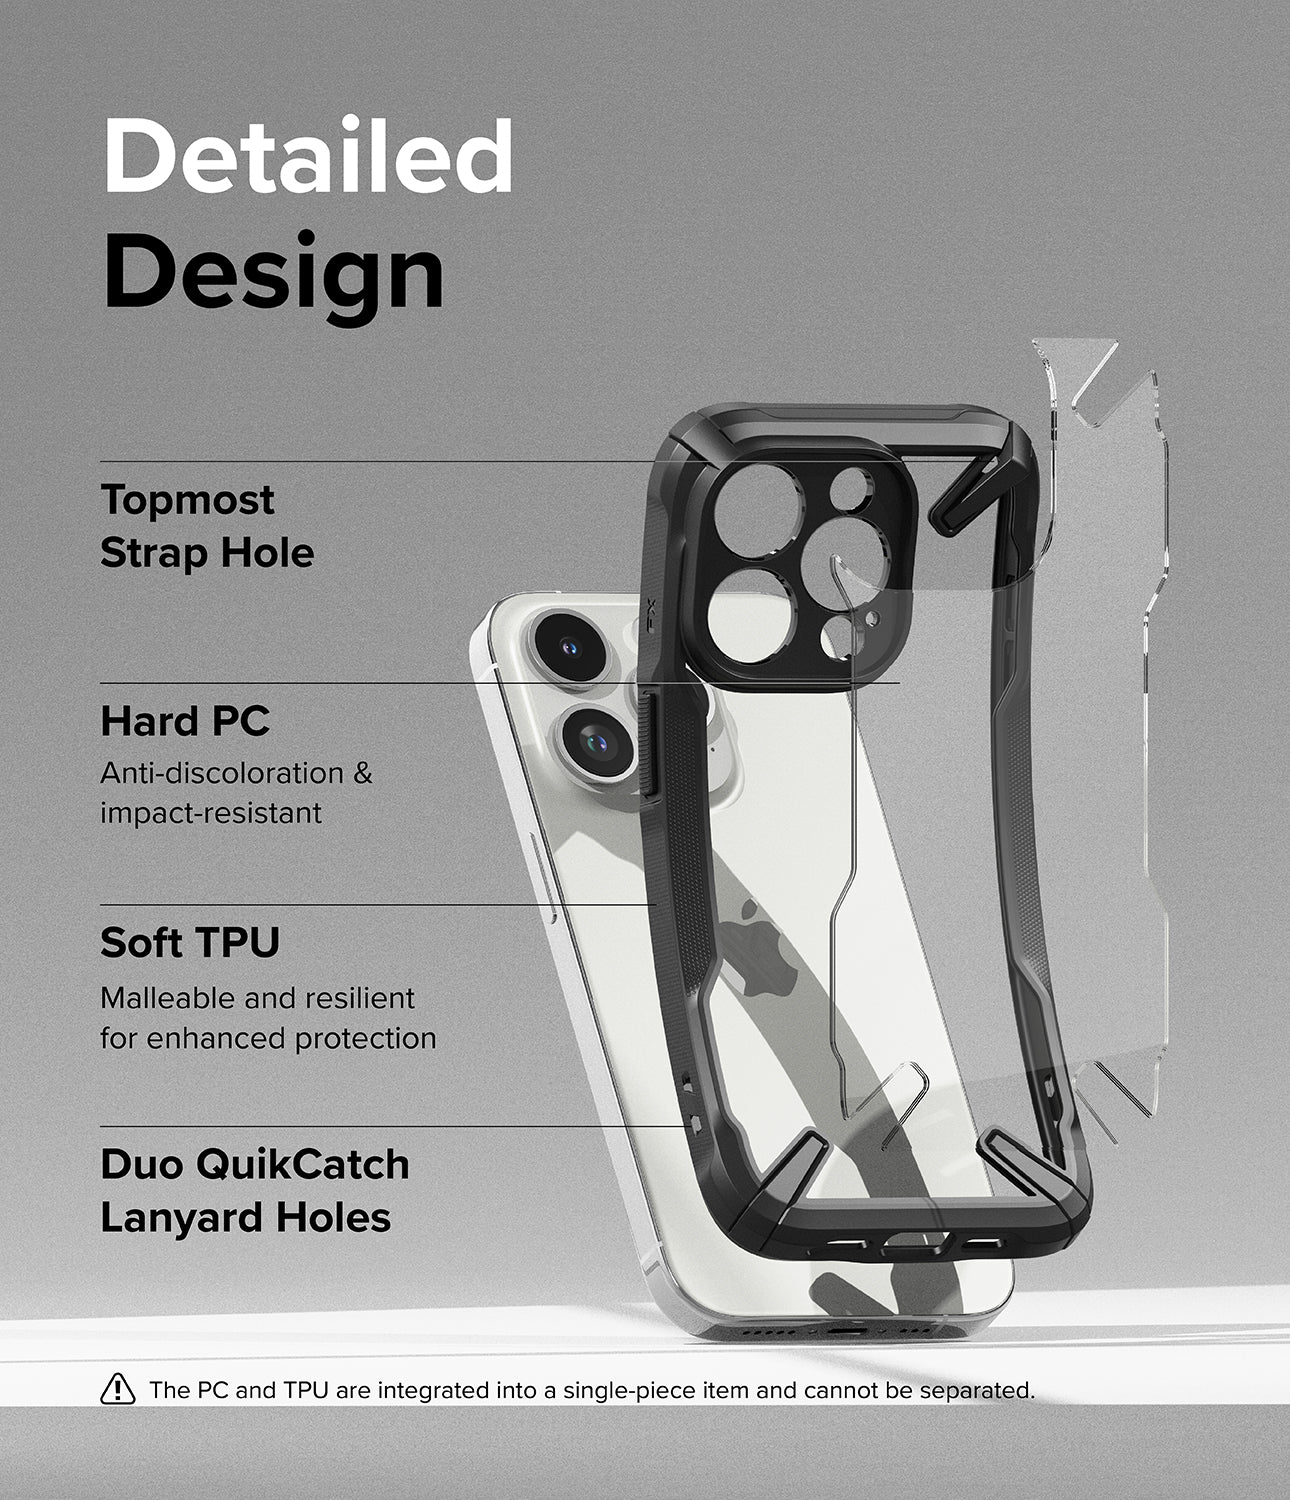 iPhone 15 Pro Max Case | Fusion-X Black - Detailed Design. Topmost Strap Hole. Anti-discoloration and impact-resistant with Hard PC. Malleable and resilient for enhanced protection with Soft TPU. Duo QuikCatch Lanyard Holes